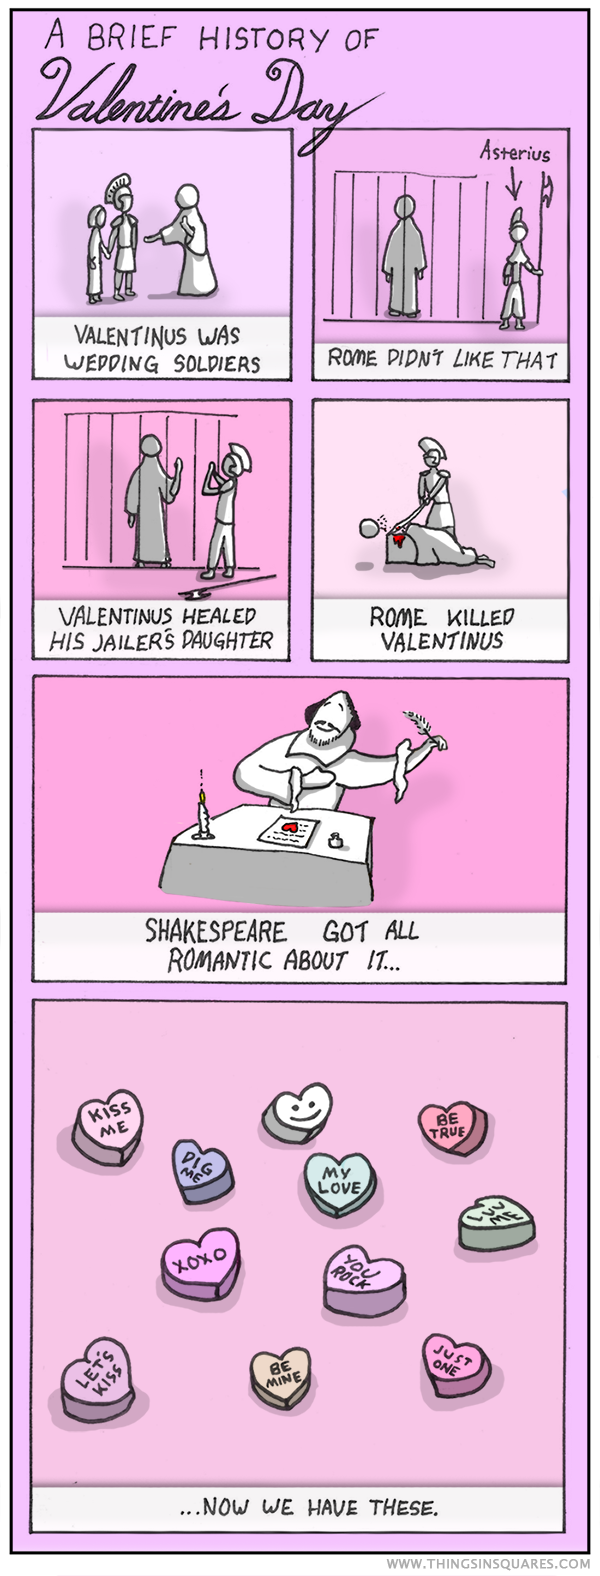 A brief history of Valentine's Day